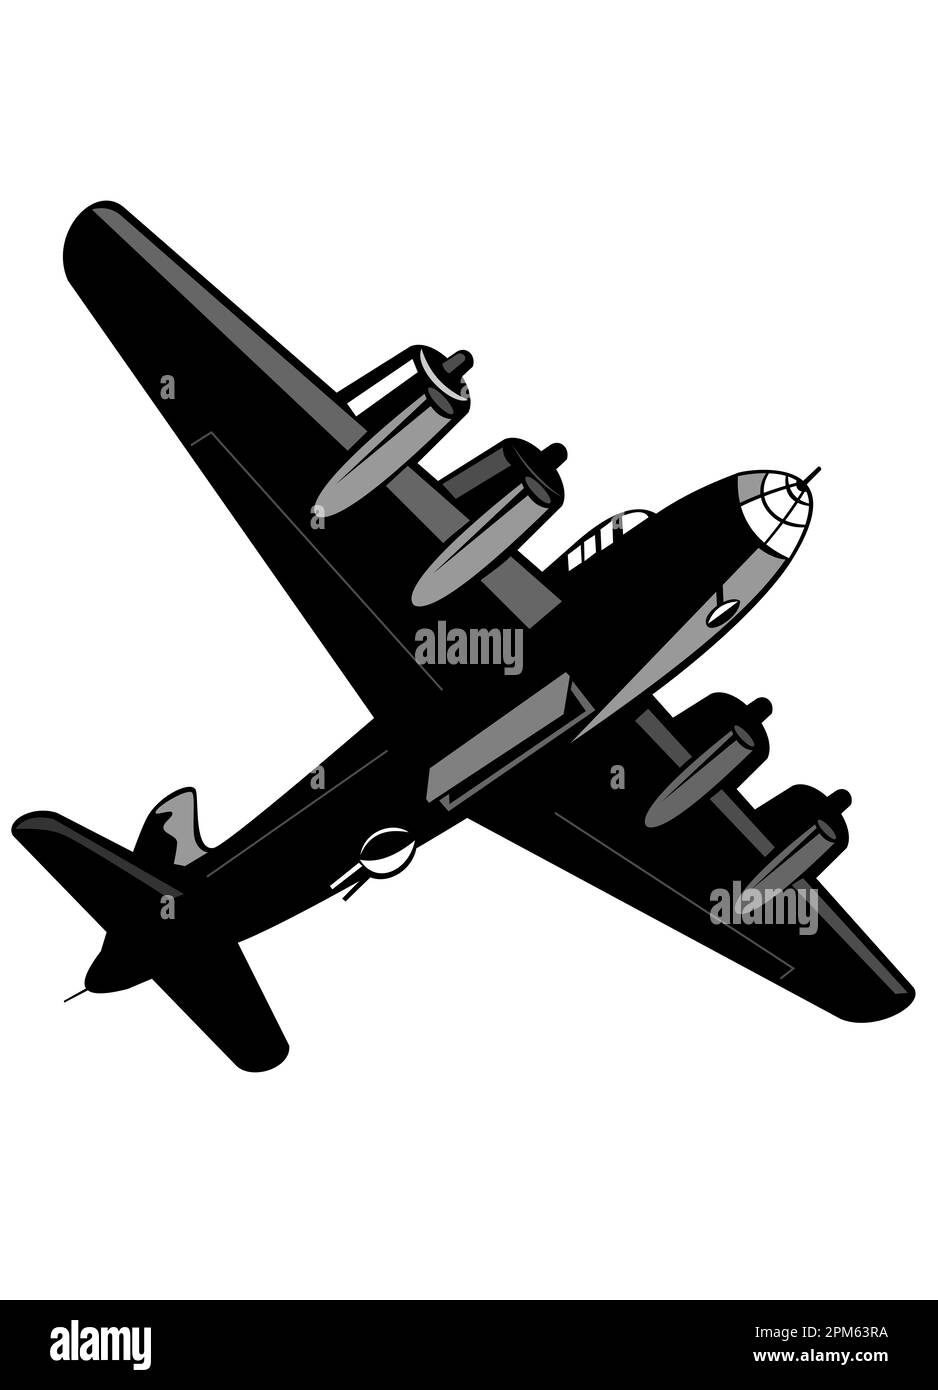 Illustration of a world war two Boeing B-29 Superfortress propeller bomber airplane in full flight flying viewed from low angle overhead on isolated b Stock Photo